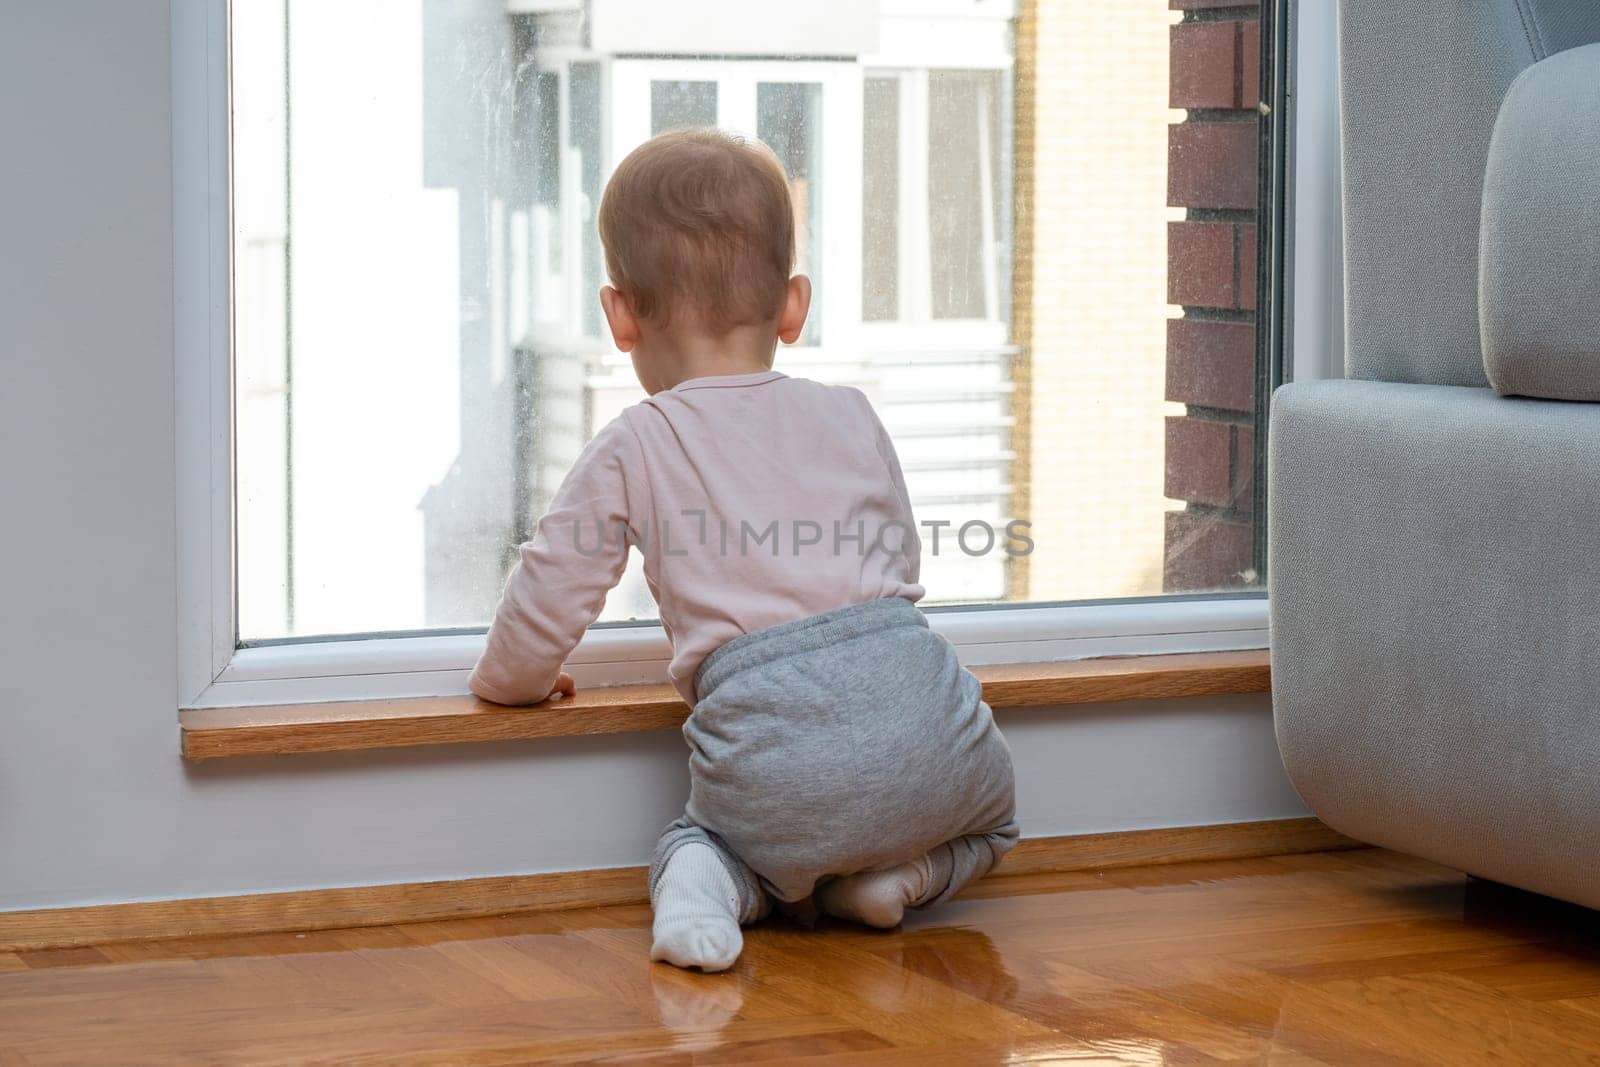 Standing at a window, a child looks out at the outside world from their apartment, wanting to explore and play. Concept of feeling trapped and dreaming of outdoor fun